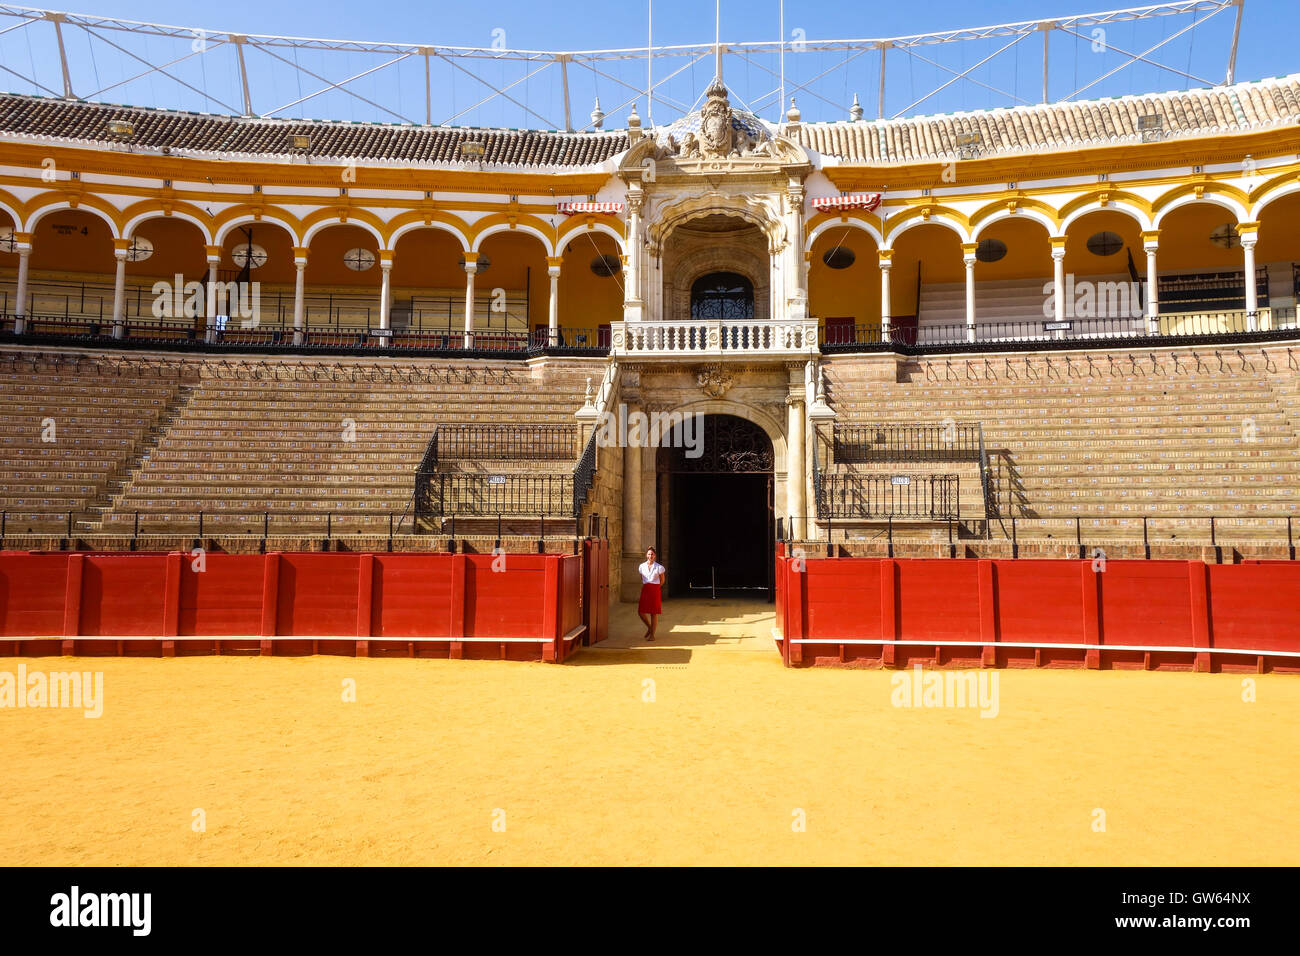 The Prince’s Box, reserved for the Royal Family in La Maestranza Bullring in Seville, Andalusia, Spain. Stock Photo